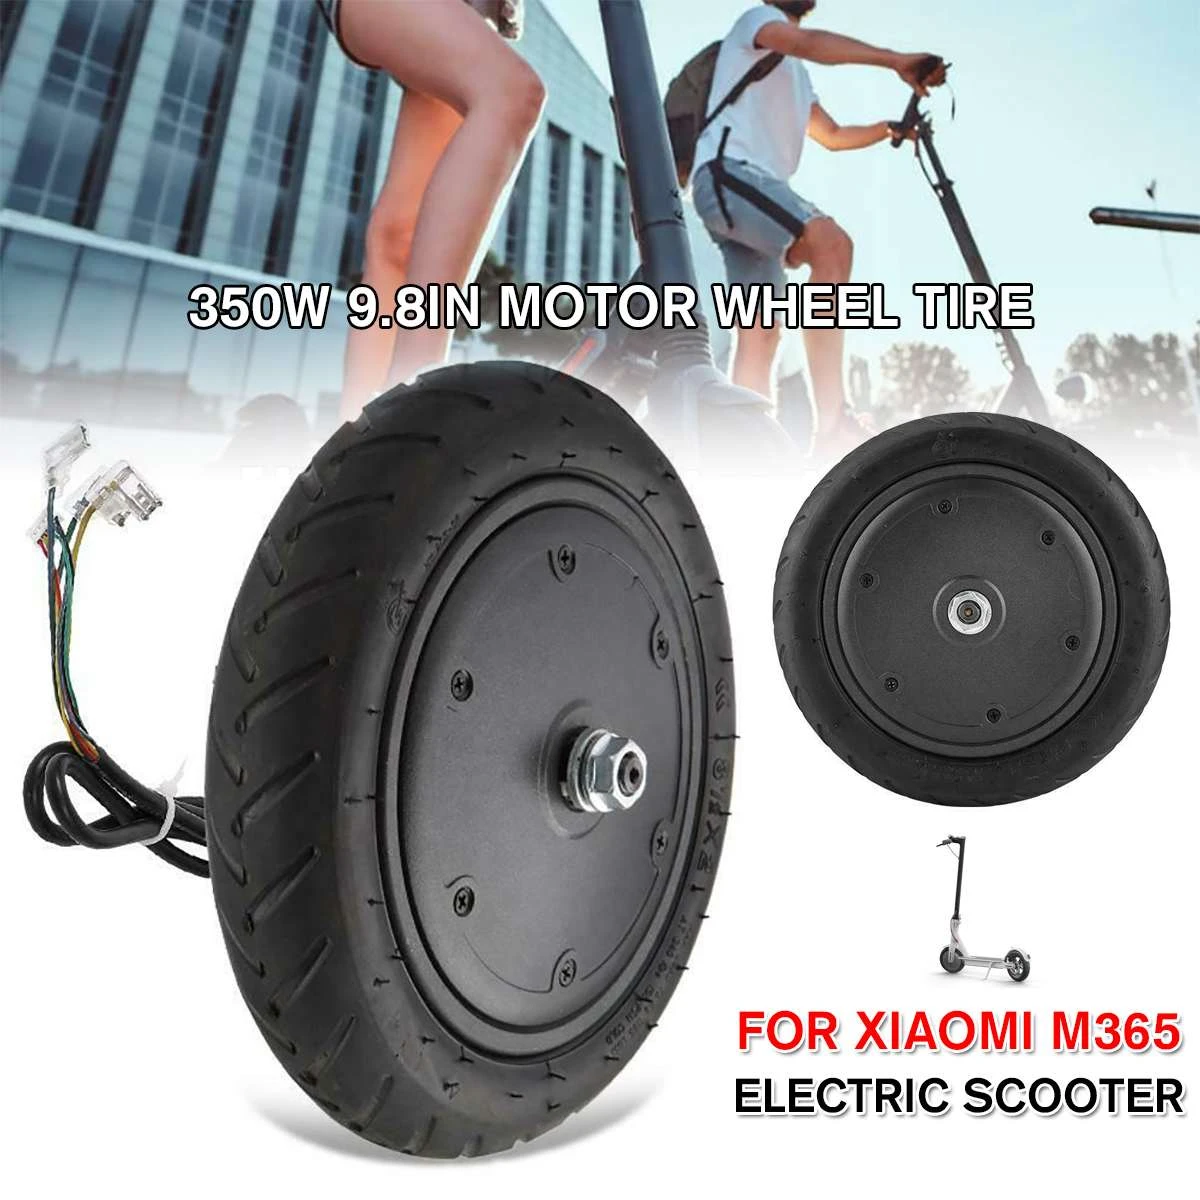 Tire Xiaomi M365 Electric Scooter Explosion Proof Inflatable tyre Anti-shock 9.8